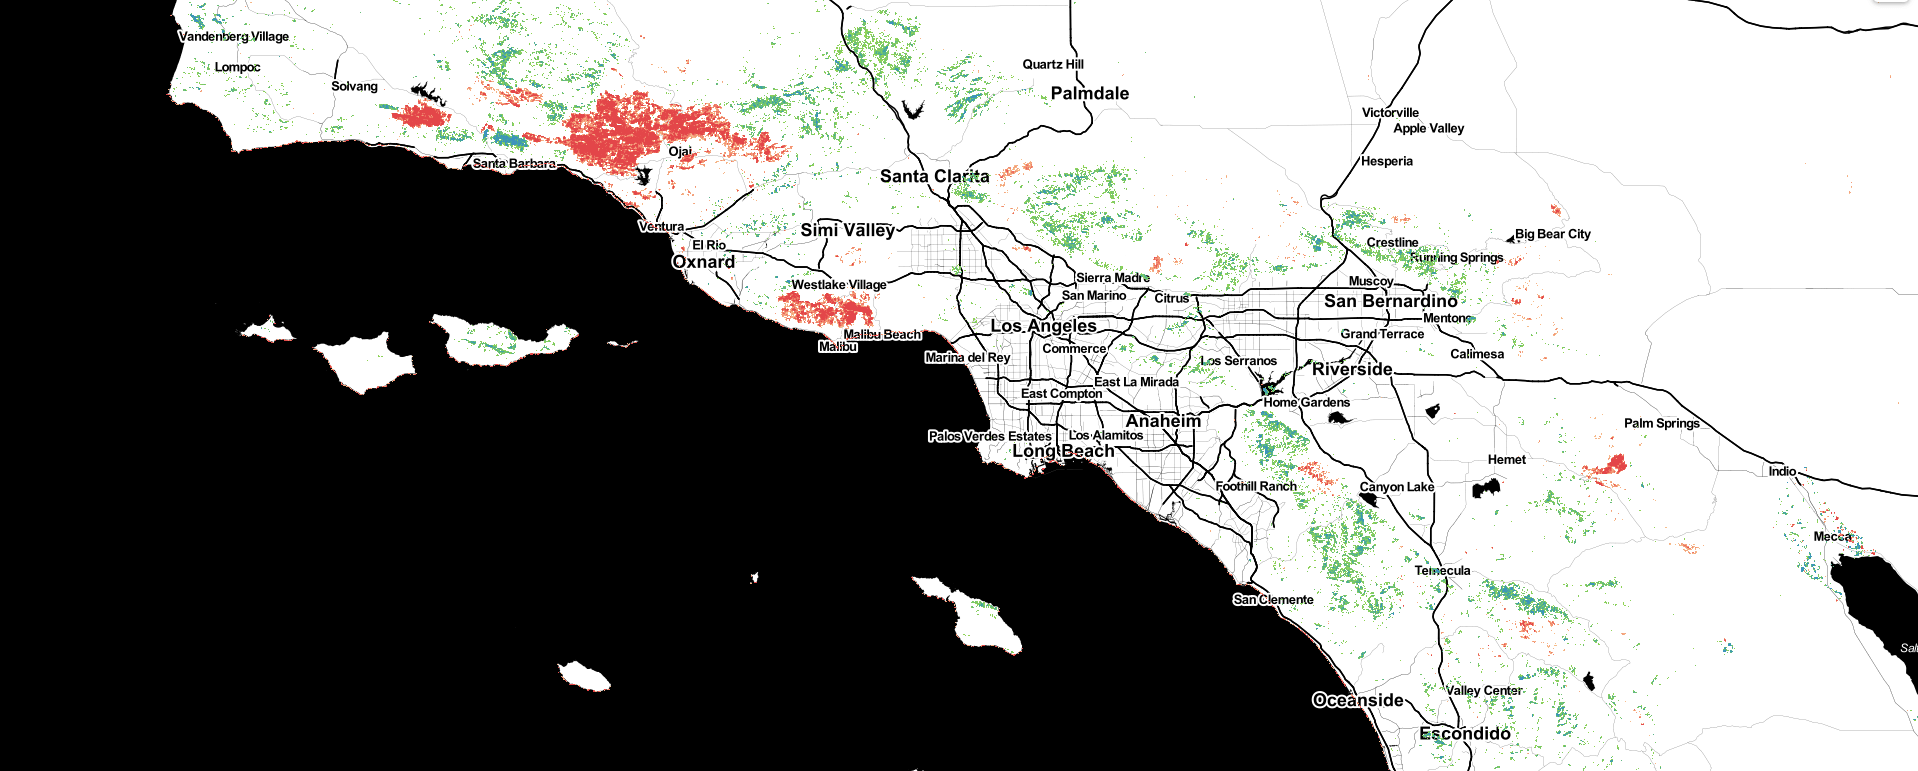 Canopy Cover Change from 2016-2020 in Southern California